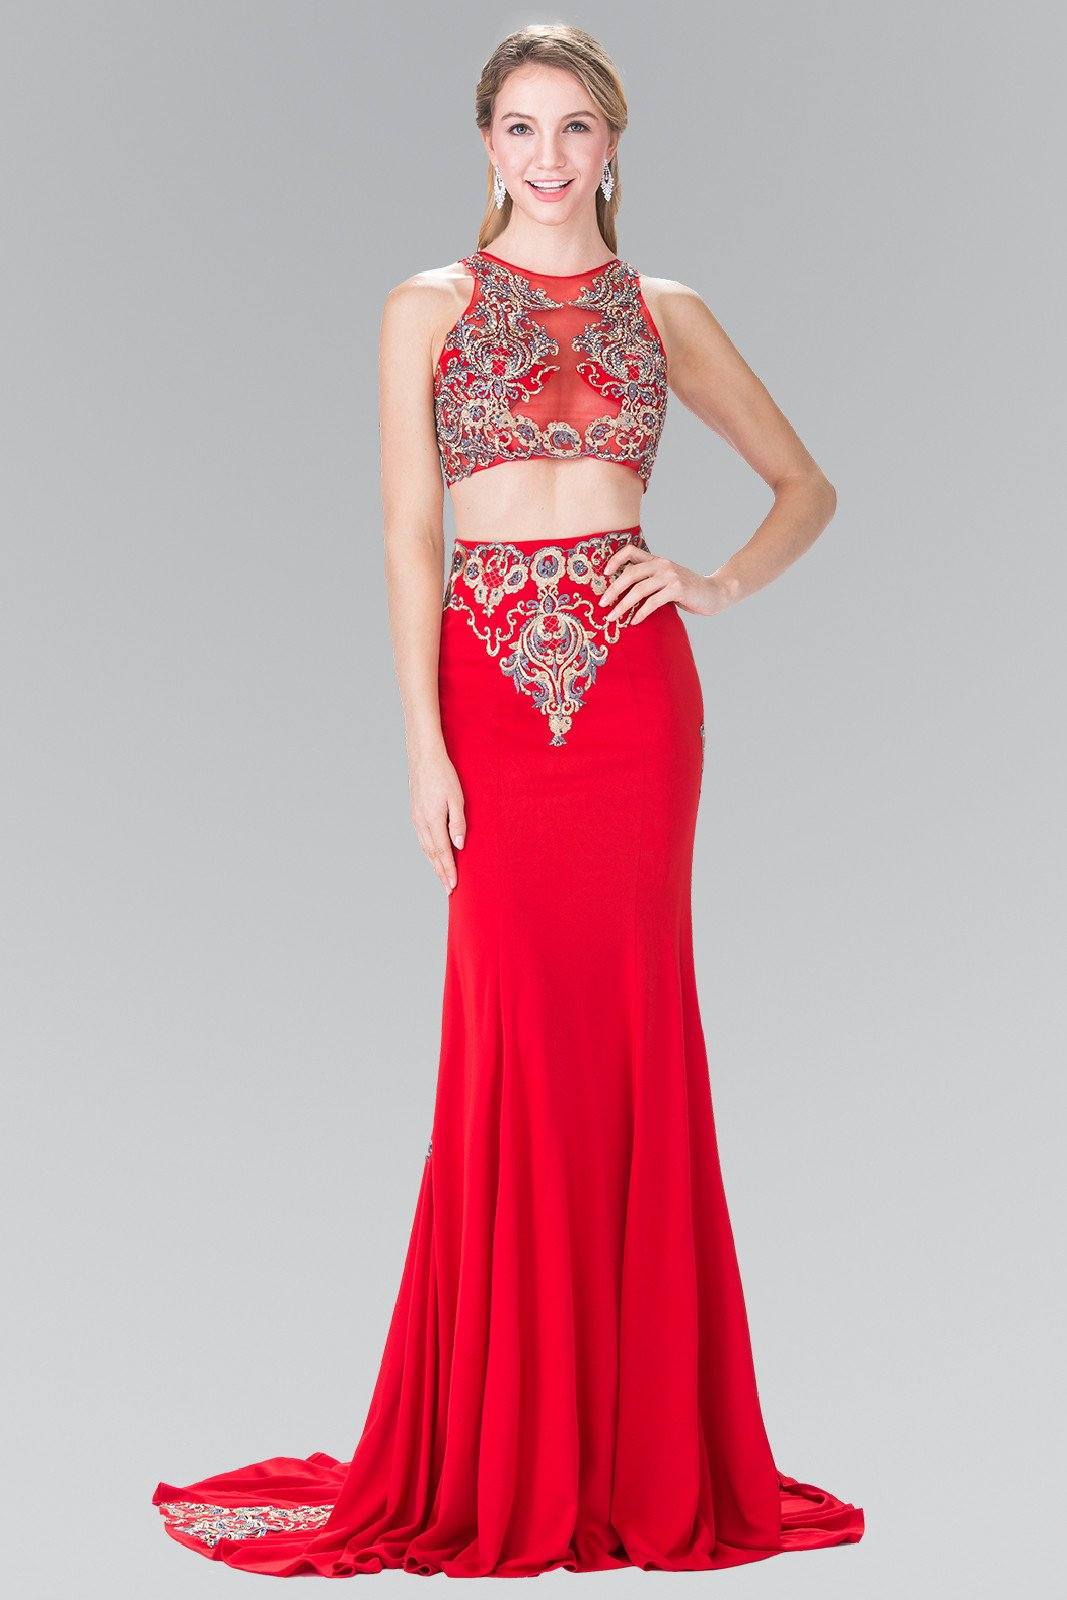 Long Two-Piece Embroidered Illusion Dress by Elizabeth K GL2296-Long Formal Dresses-ABC Fashion